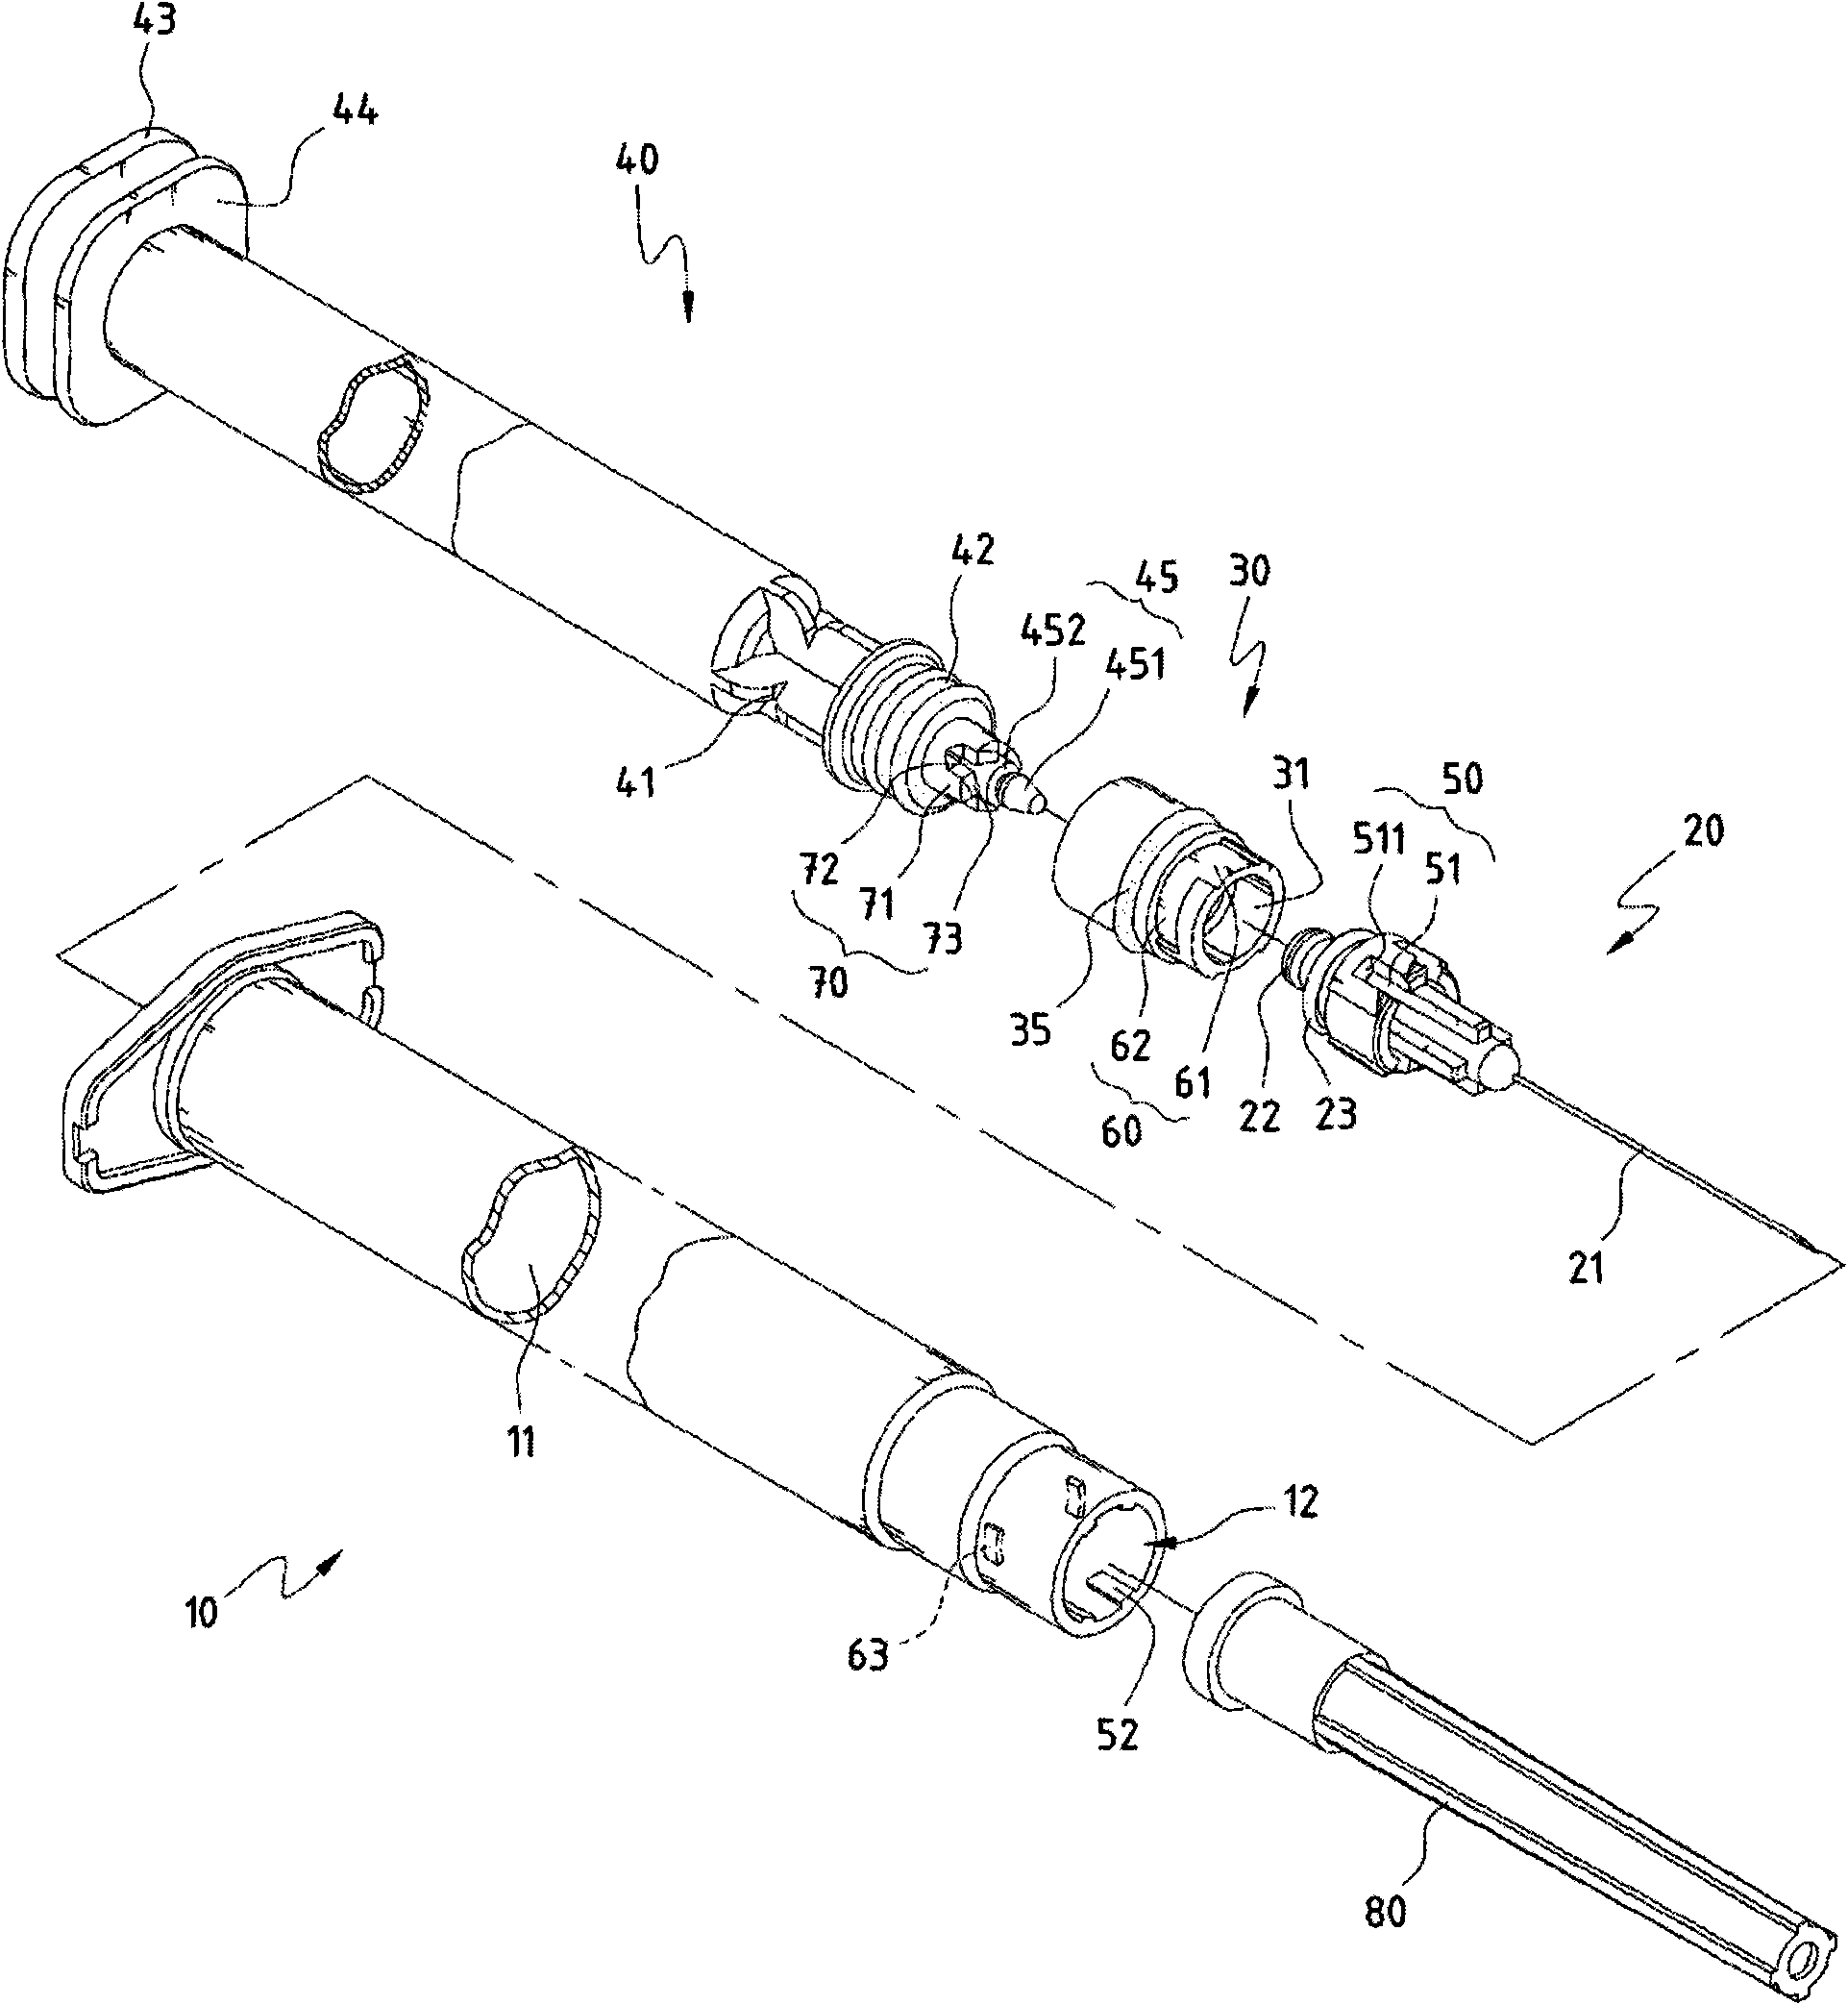 Retraction structure of safety syringe